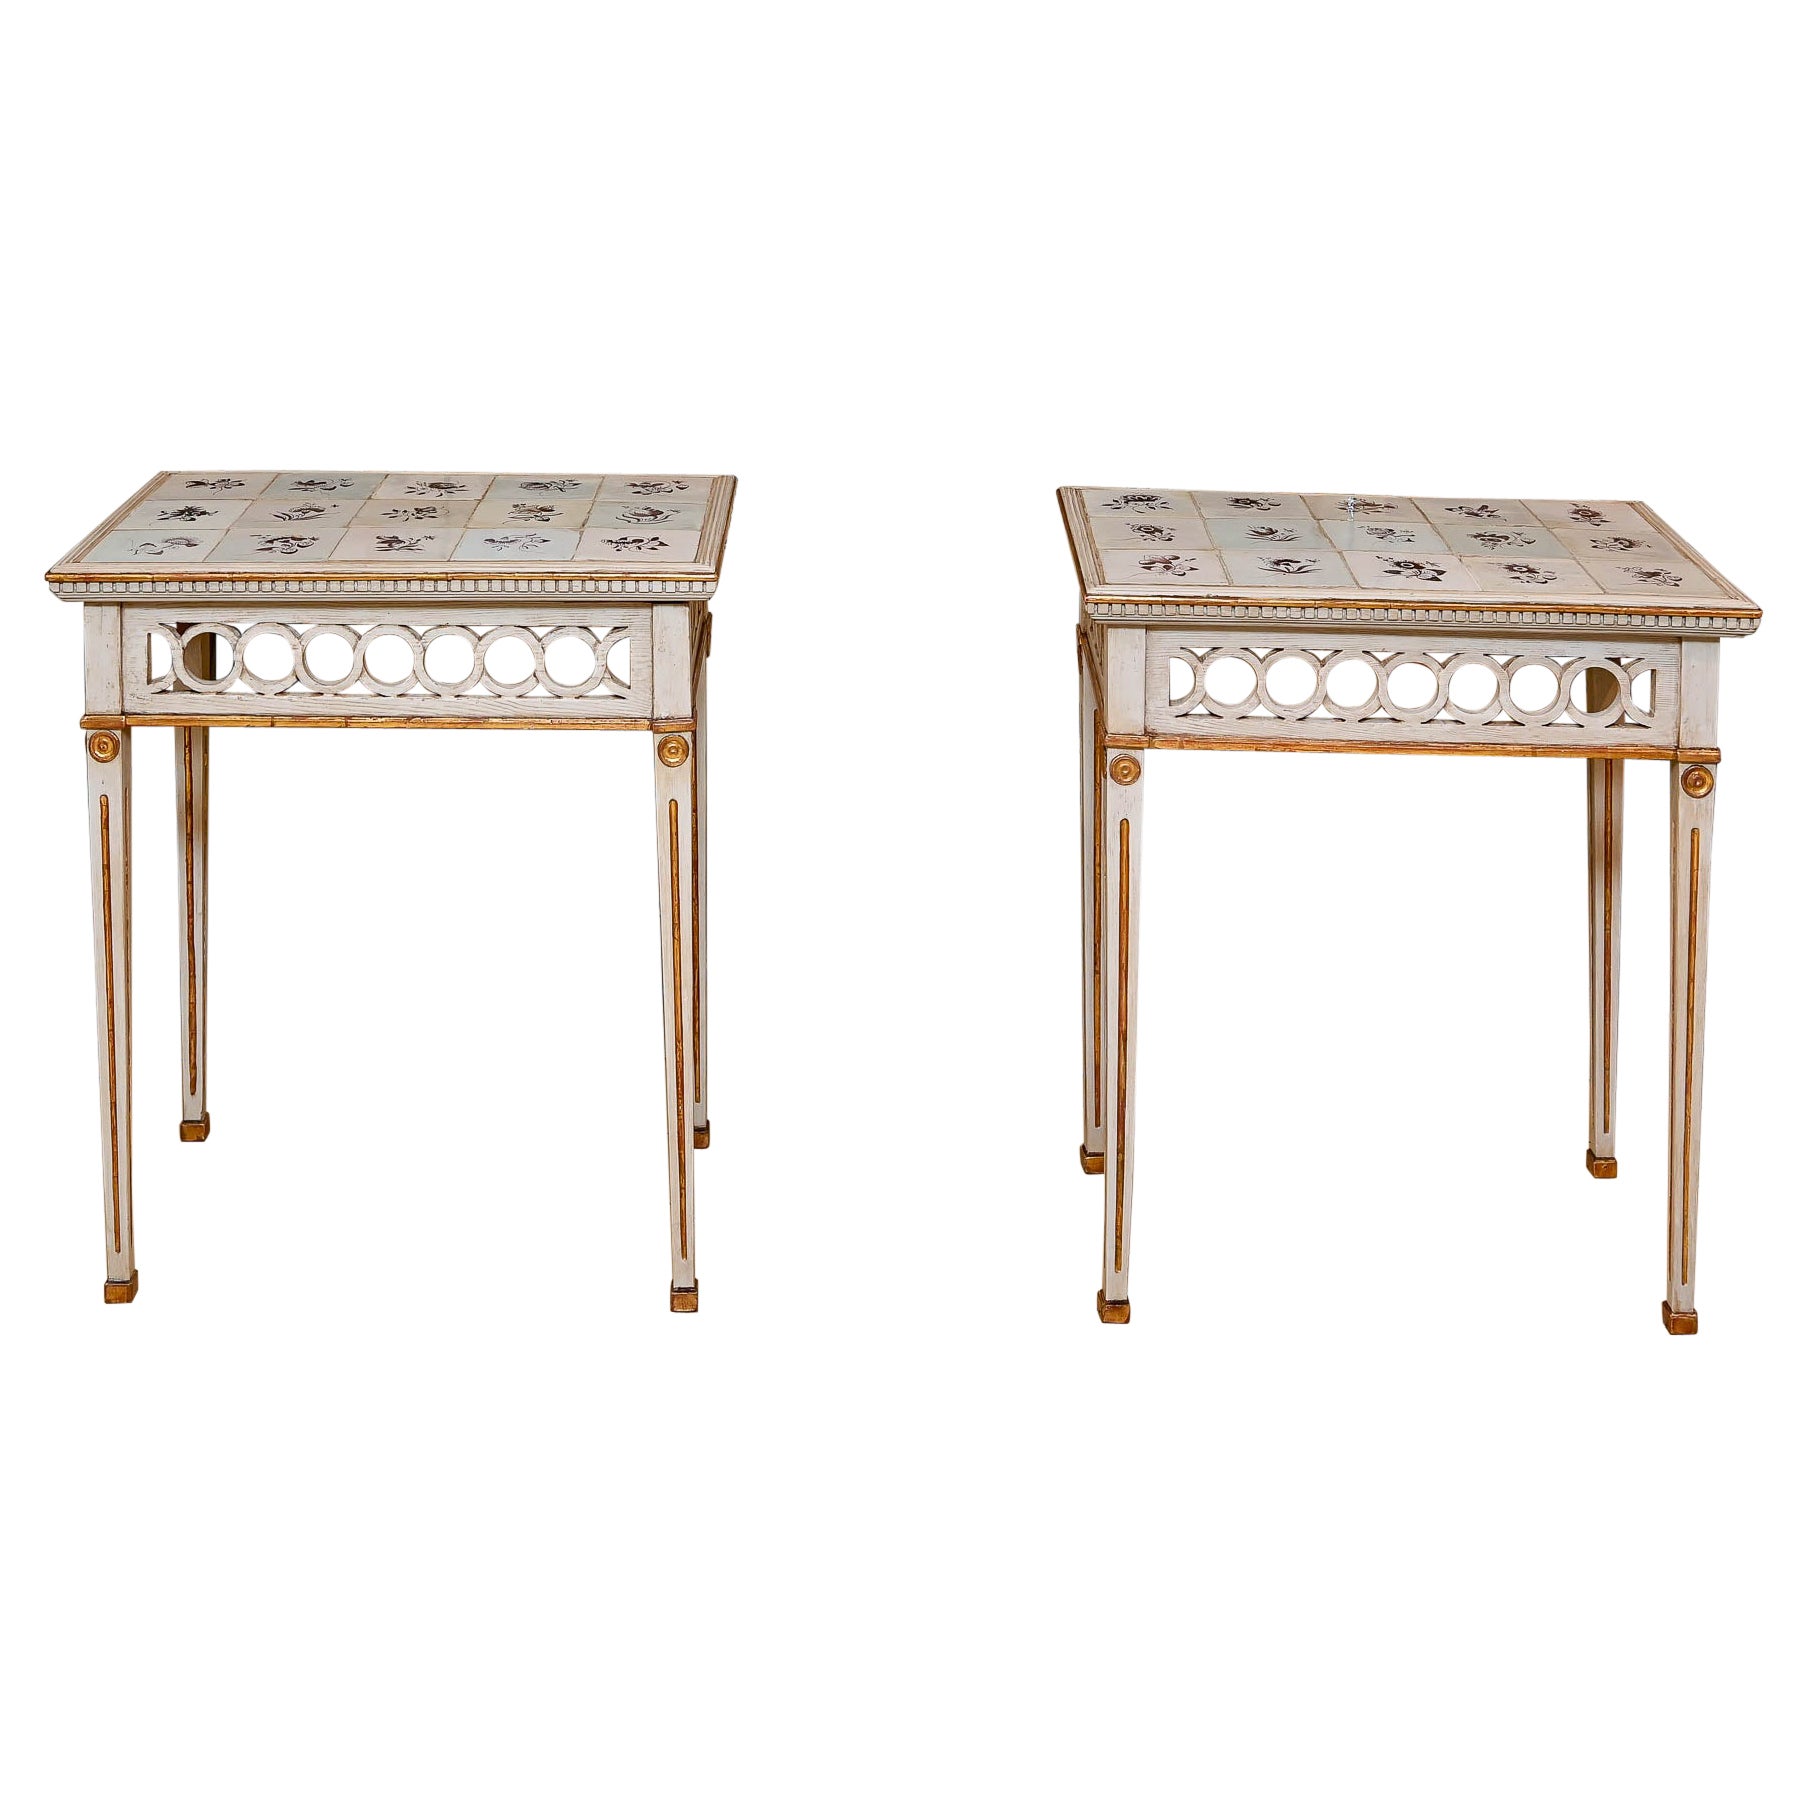 18th Century Pair of Console Tables With Manganese-coloured Tiles North German For Sale